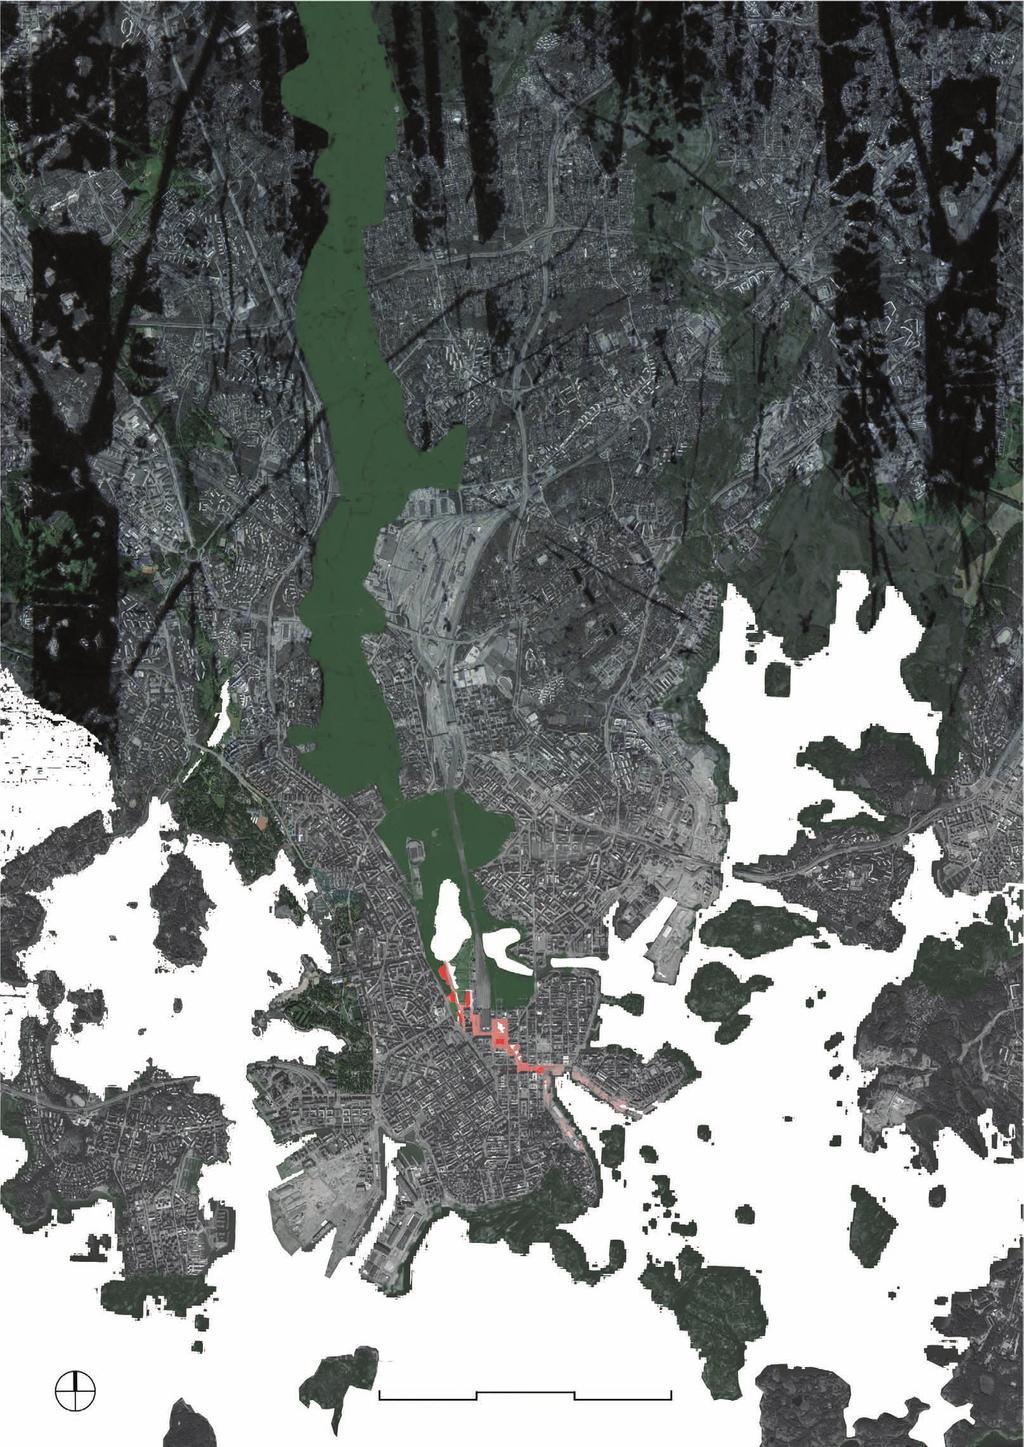 I NEXT HELSINKI PROPOSAL Connecting Forest to Sea Creating a continuous public open space linking South Harbour through the Kluuvi diagonal to Central Park and the larger